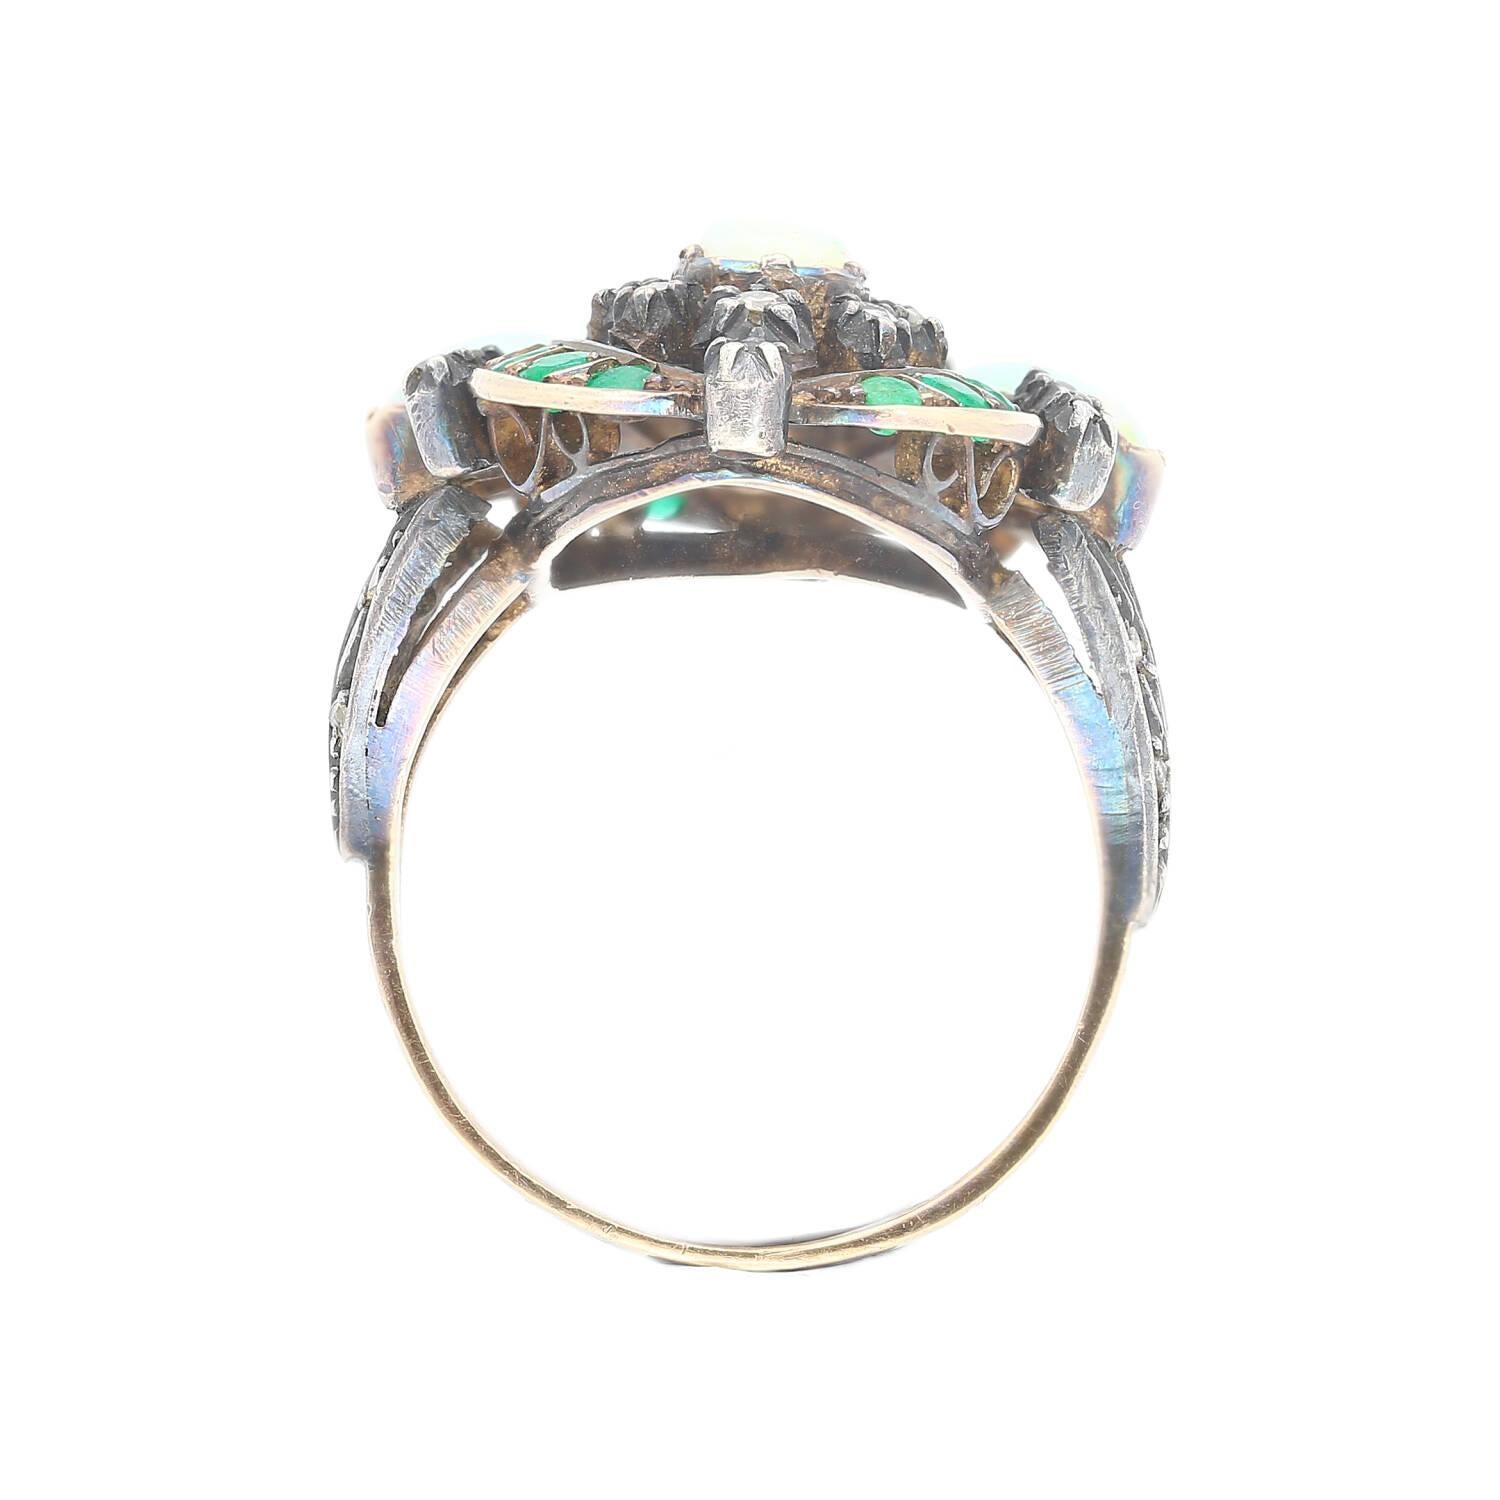 Transport yourself to the refined allure of the Victorian Era with our meticulously crafted Opal Emerald and Diamond Ring. This exquisite cocktail ring showcases prong-set opal stones, along with mesmerizing emeralds and diamonds, elegantly set in a